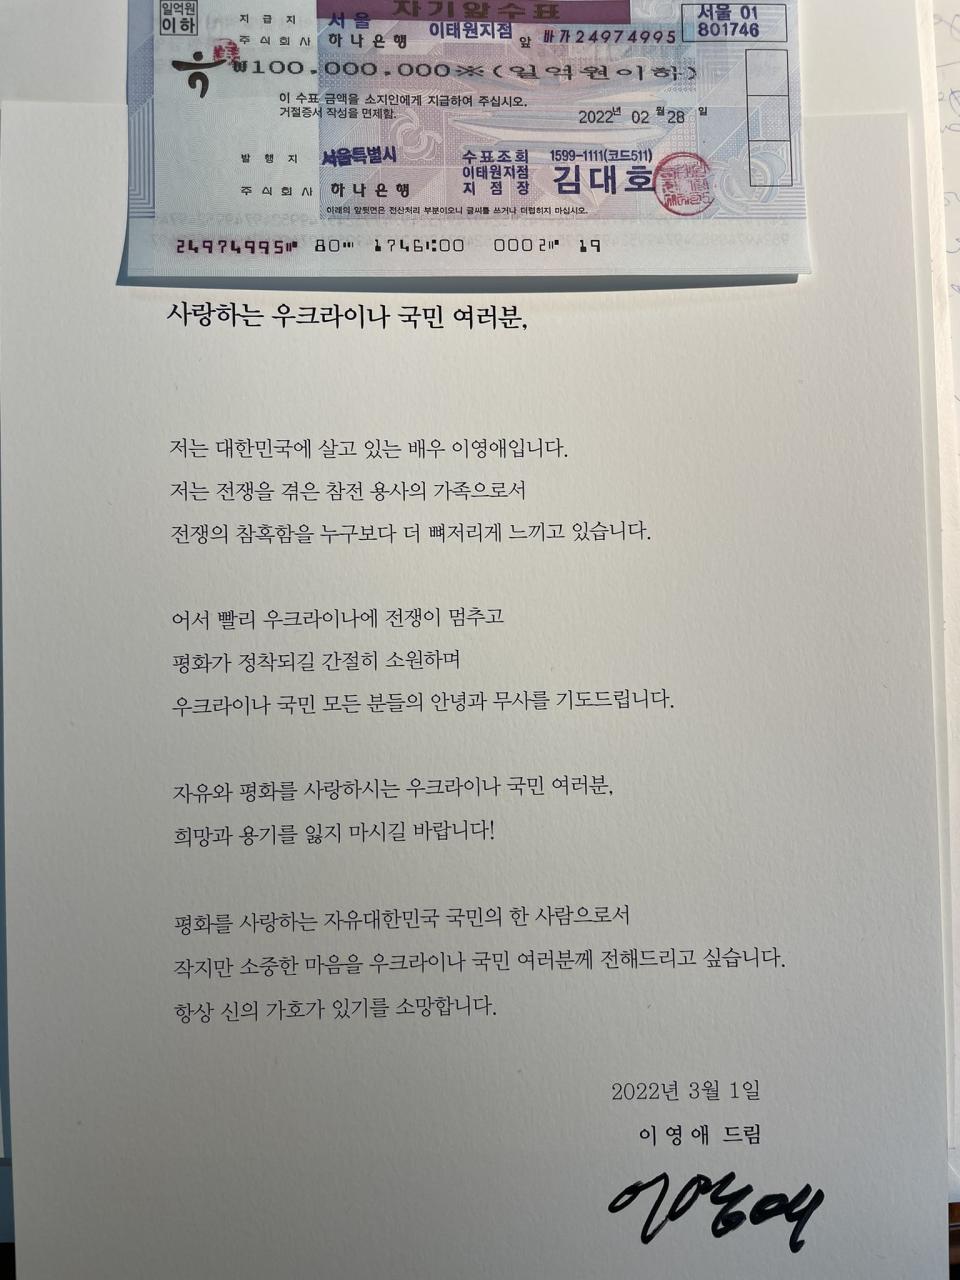 South Korean actress Lee Young-ae's letter to the Ukrainian government and her cheque for a donation of 100 million won to Ukraine in support of victims of the Russia-Ukraine war. (Image from Ukrainian ambassador Dmytro Ponomarenko's Twitter account)